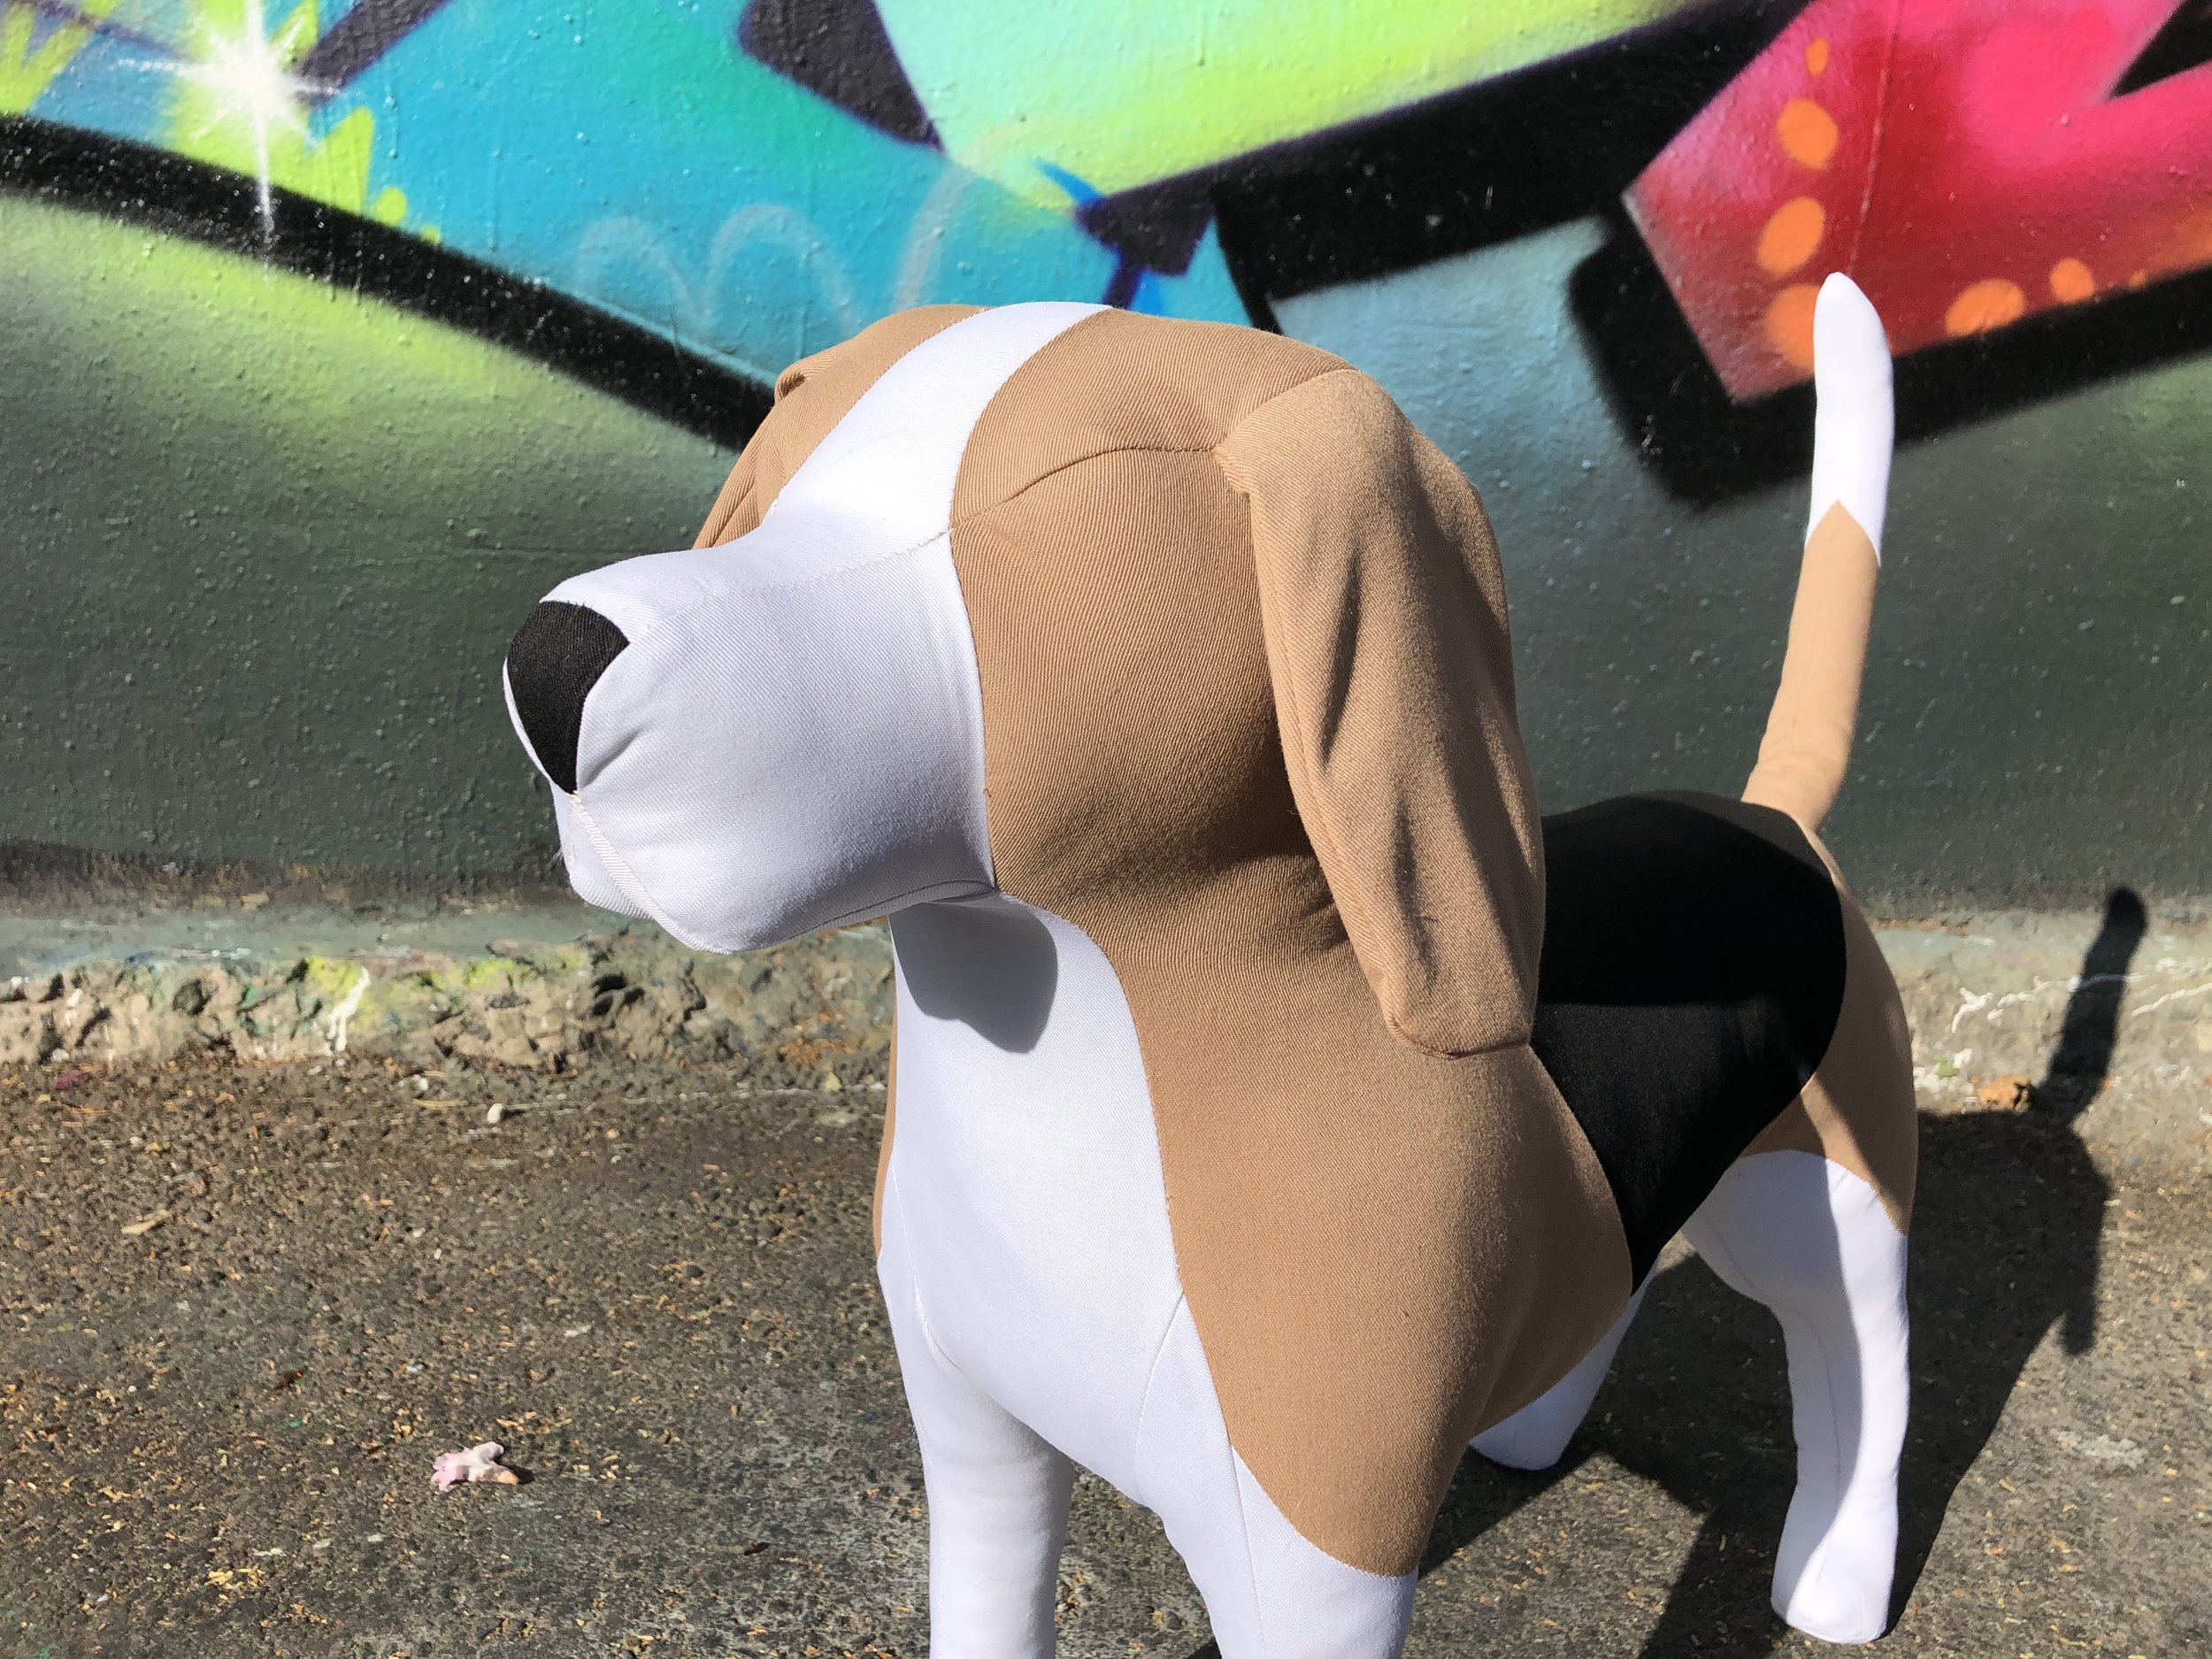 Panache Display - Introducing Bailey our new #dog #mannequin collection.  Bailey is a beagle style dog available in three versatile positions, he is  perfect for displaying current trends in canine fashion from